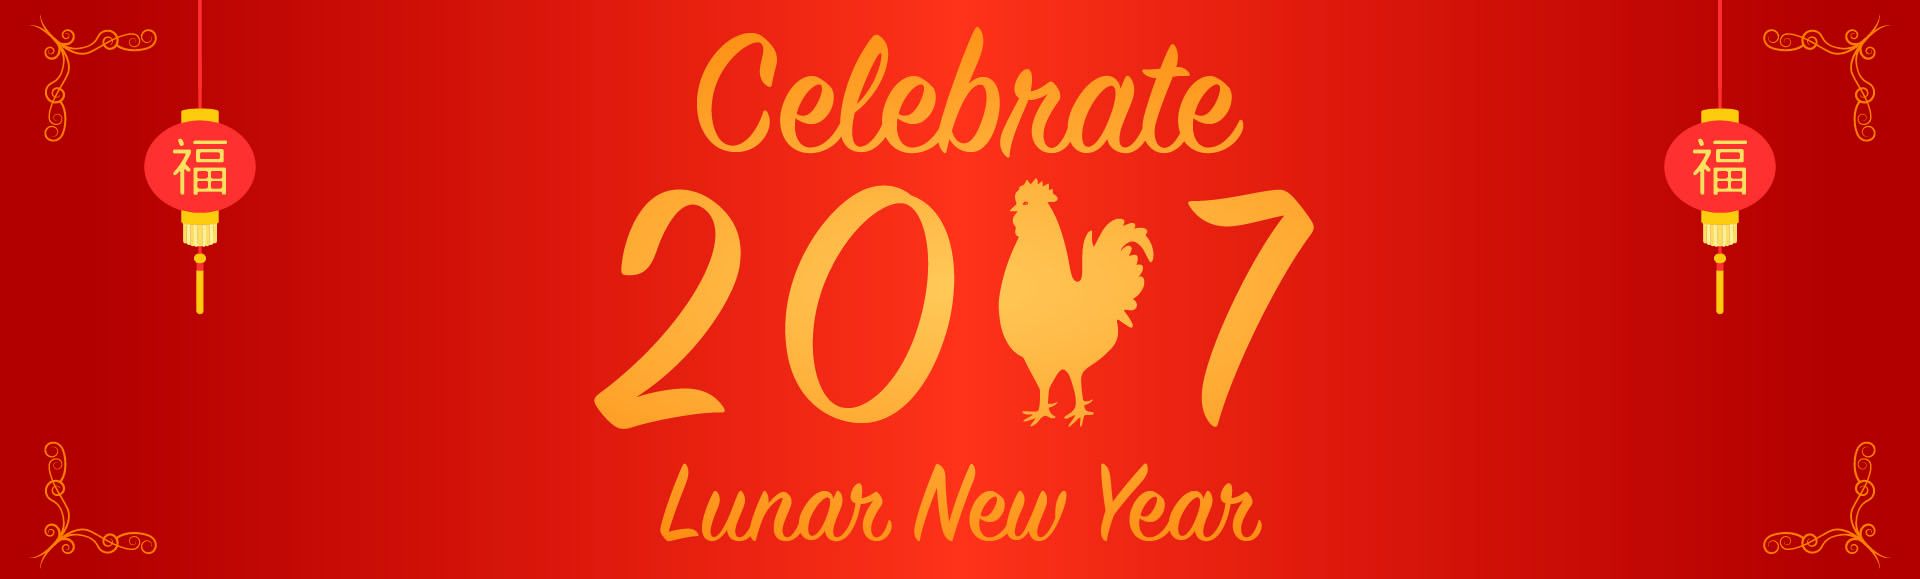 lunar new year graphic